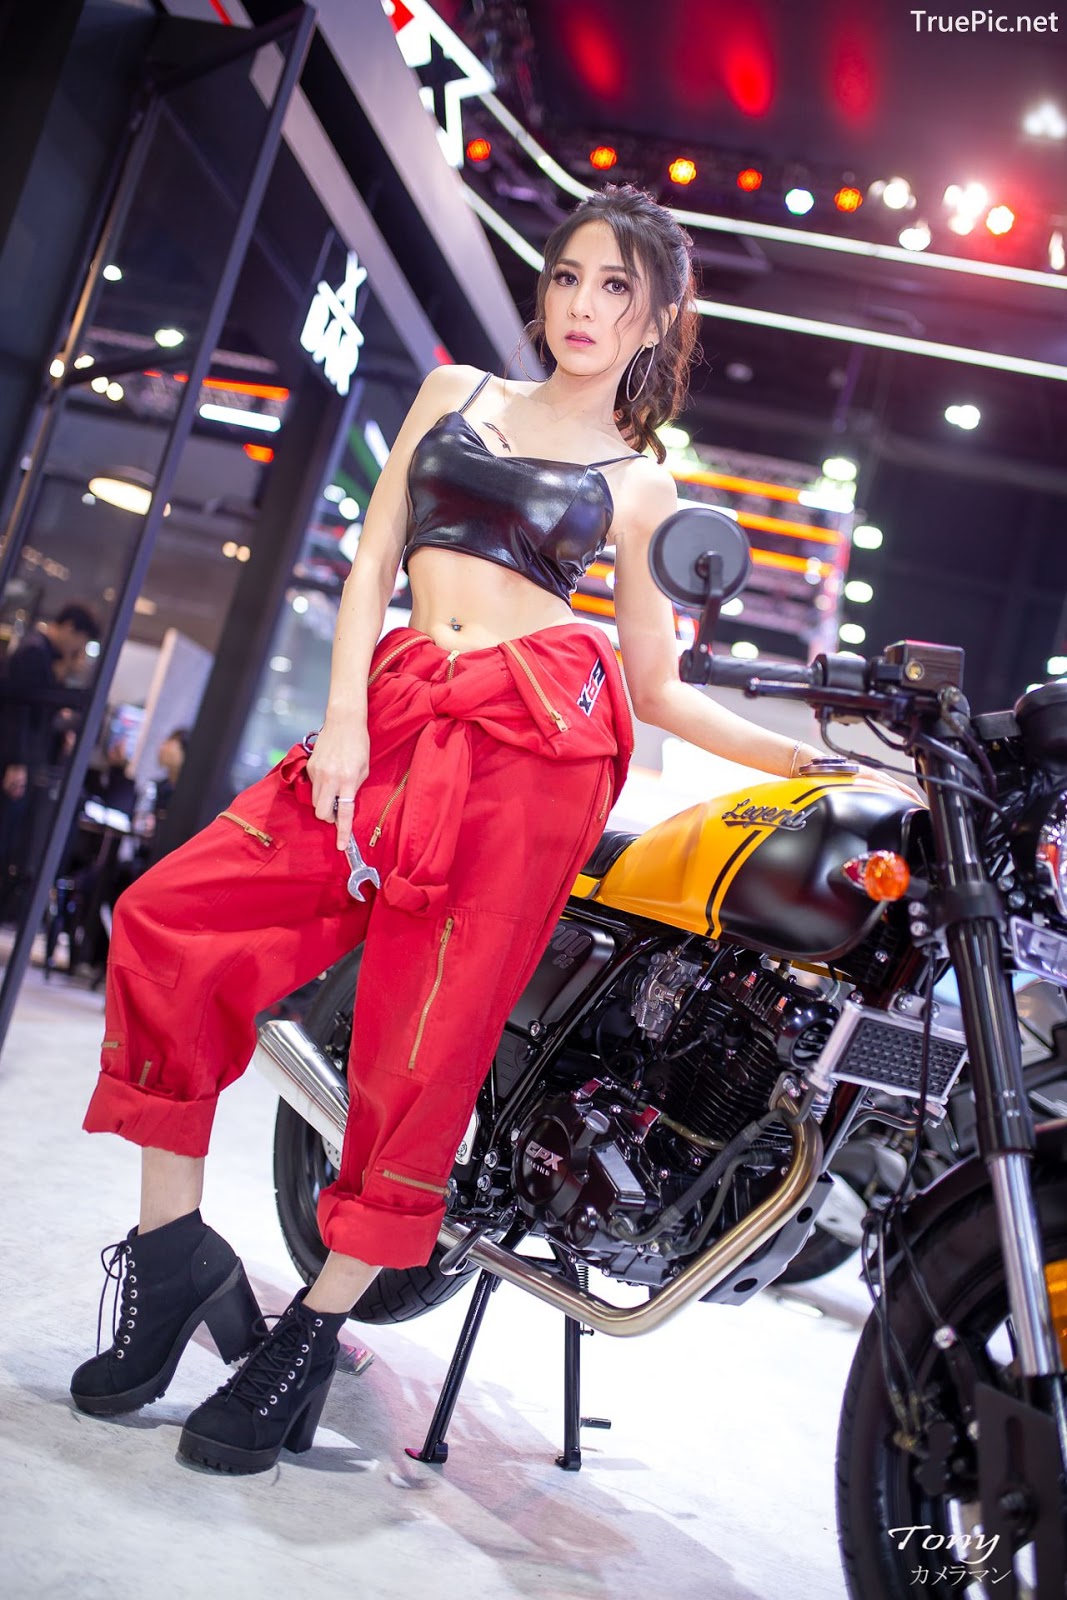 Image-Thailand-Hot-Model-Thai-Racing-Girl-At-Motor-Show-2019-TruePic.net- Picture-39